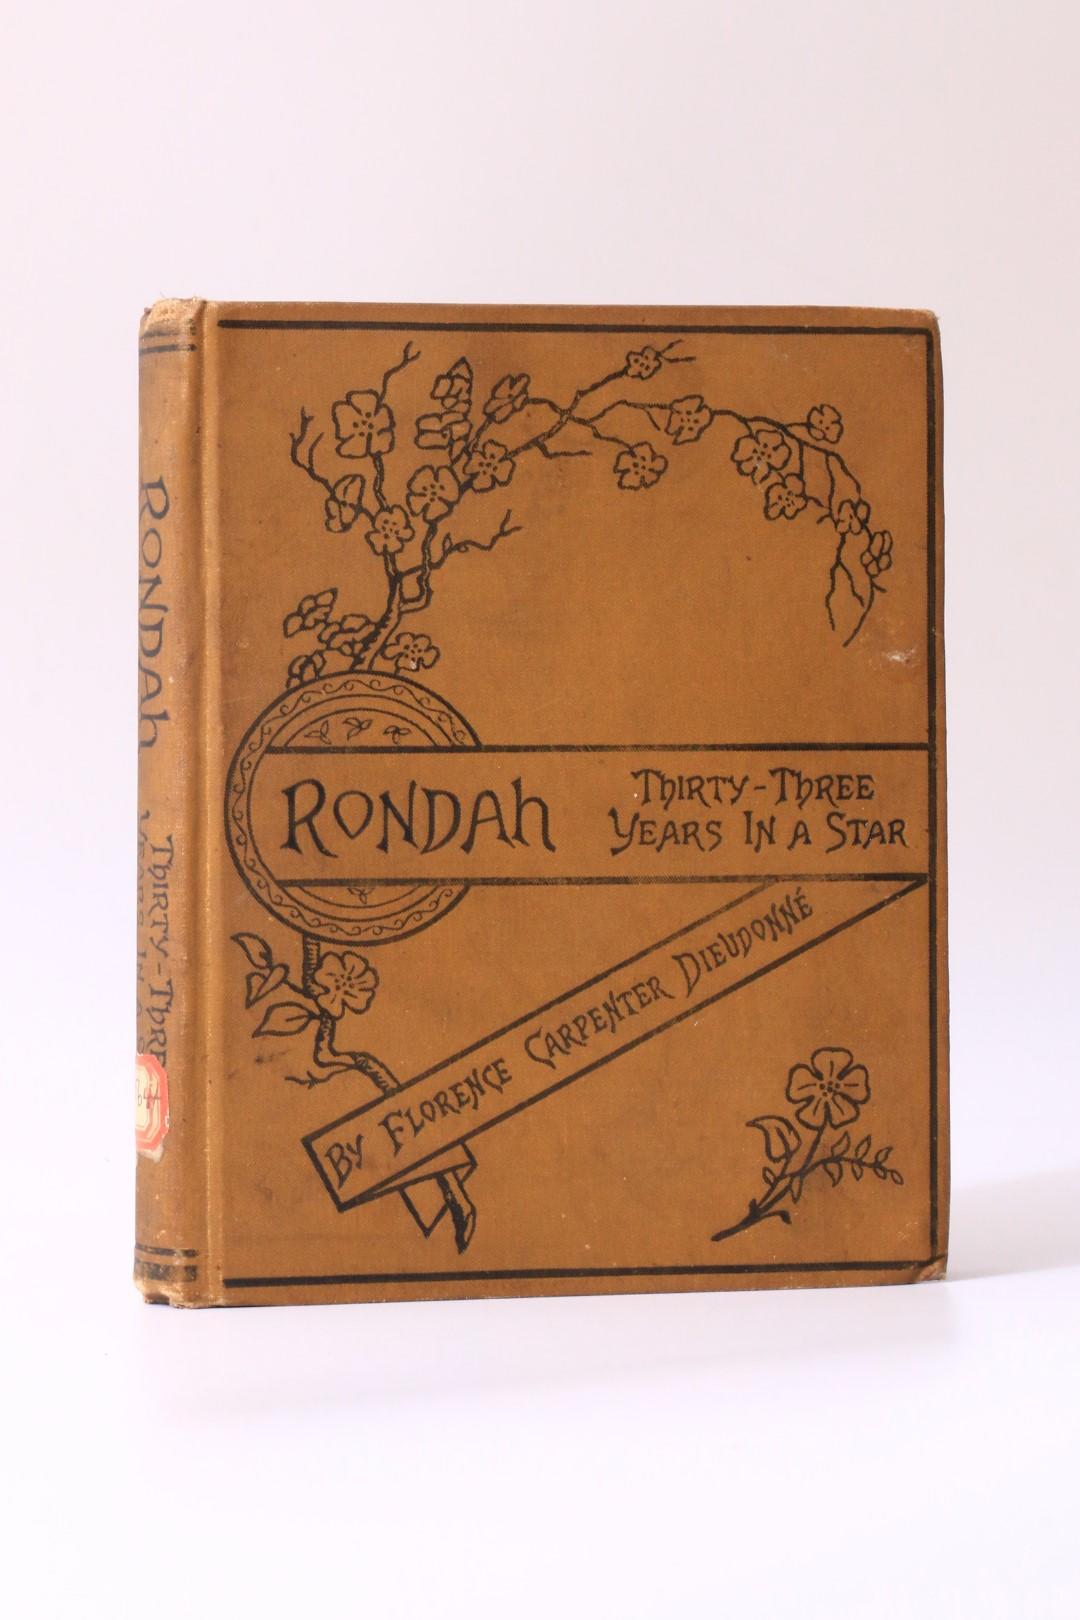 Florence Carpenter Dieudonne - Rondah, or Thirty-Three Years in a Star - T.B. Peterson & Brothers, 1887, First Edition.